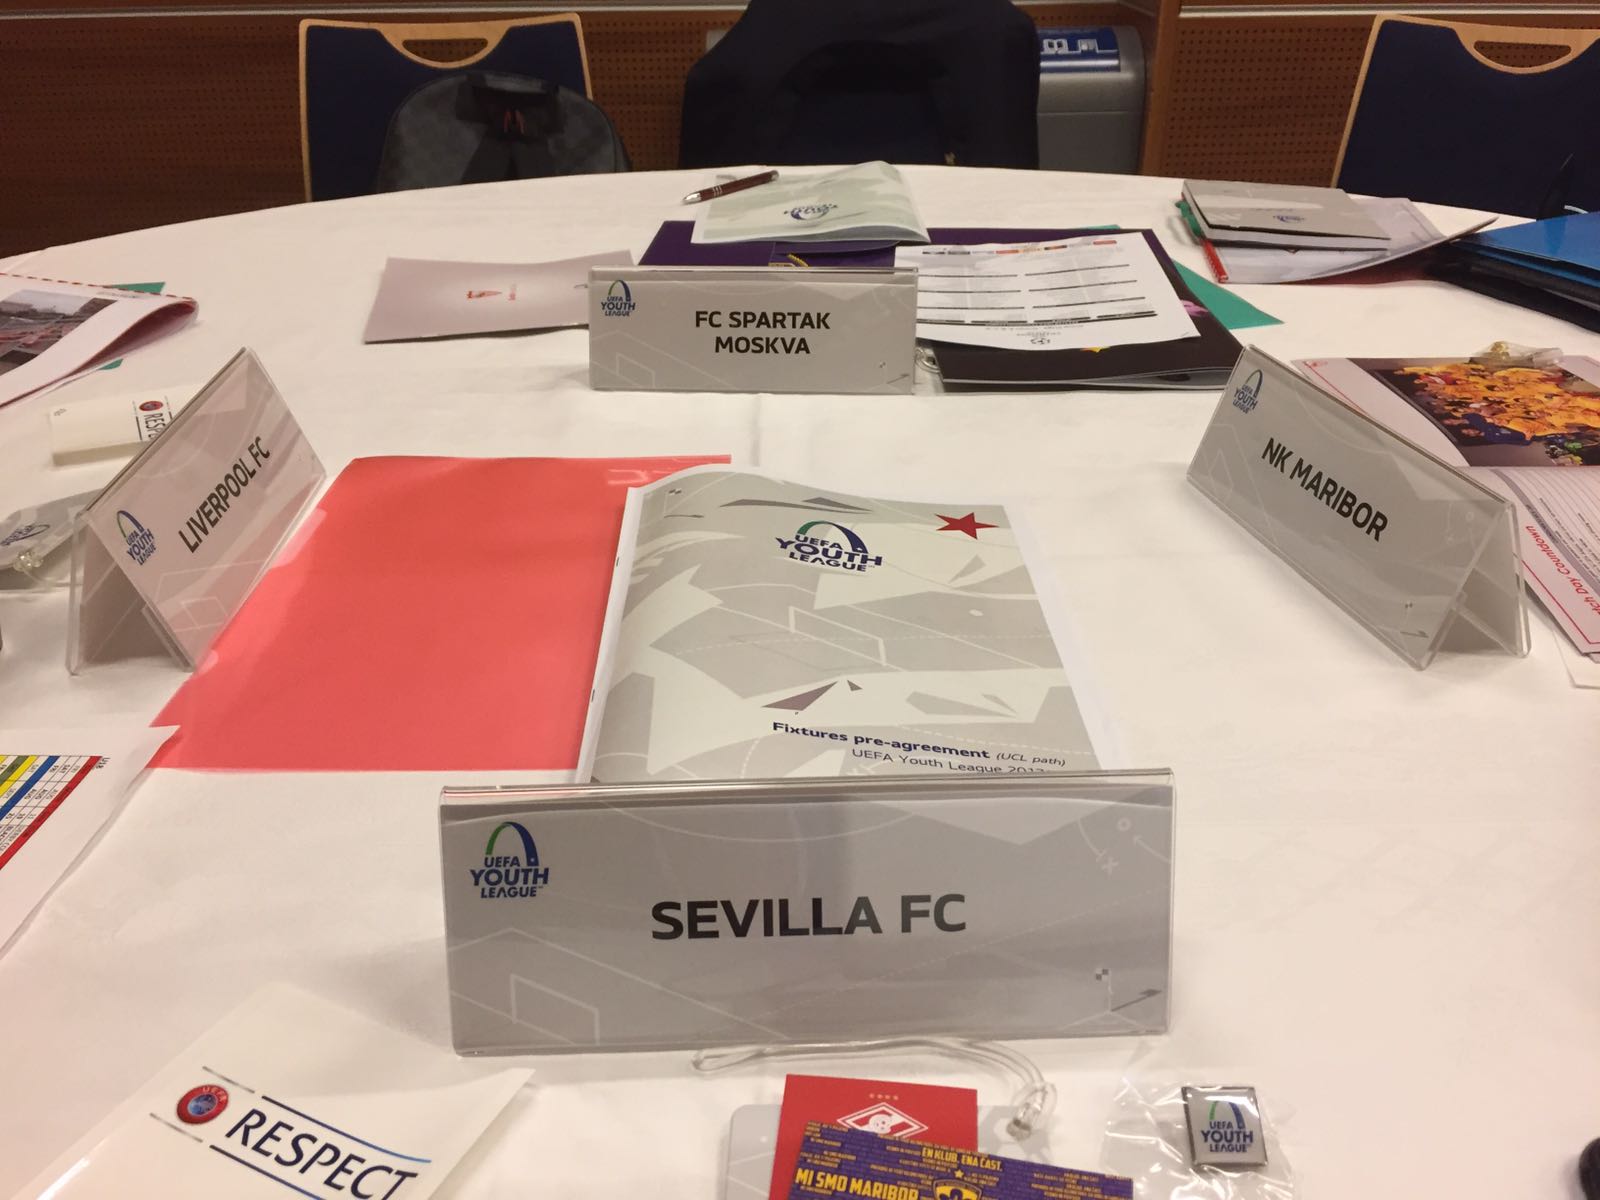 Sevilla FC opponents in UEFA Youth League